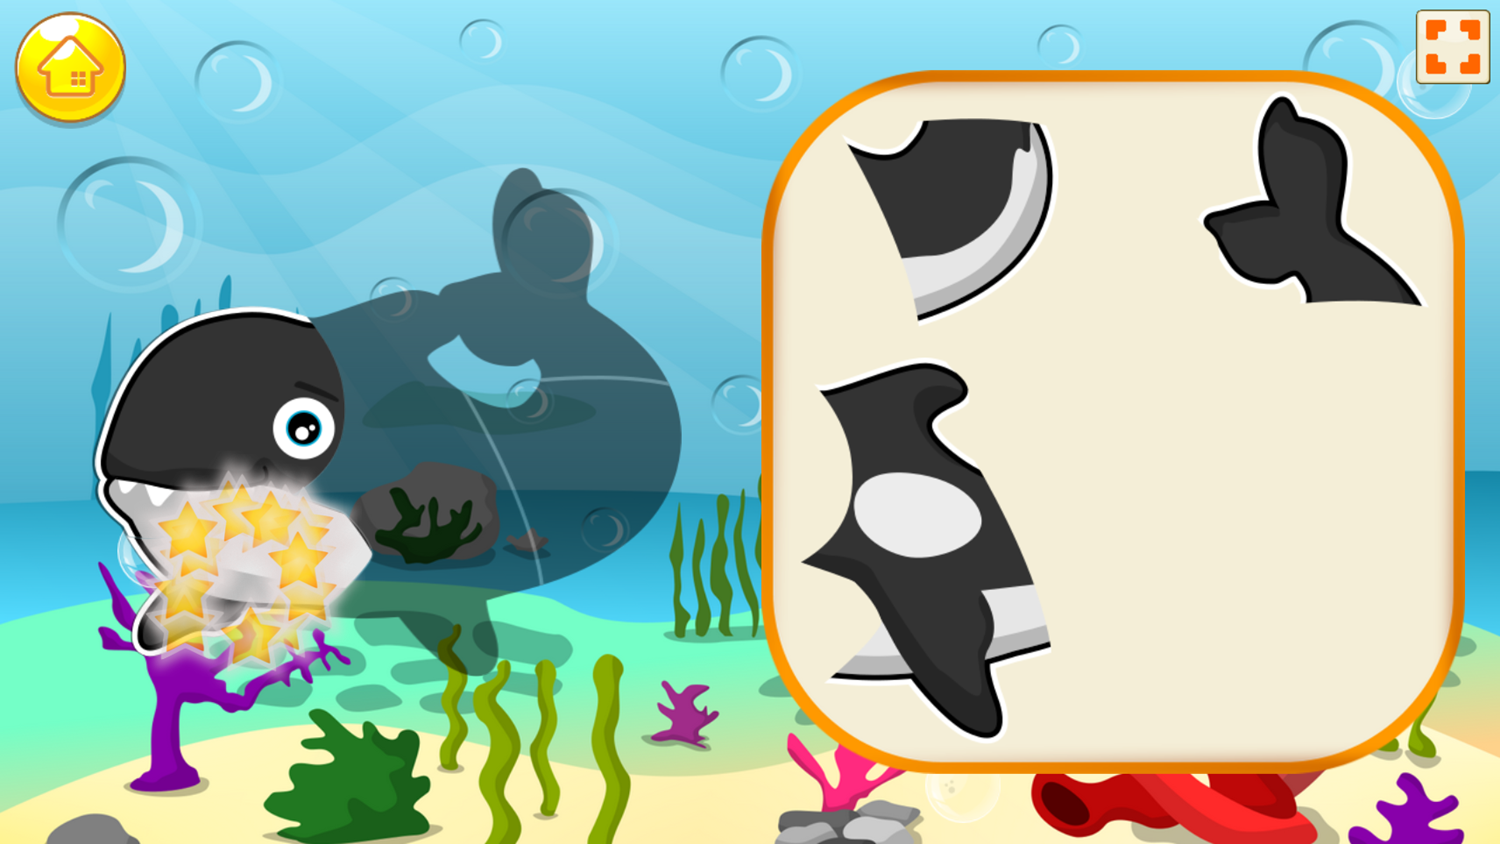 Puzzle Time Sea Creatures Game Level Play Screenshot.